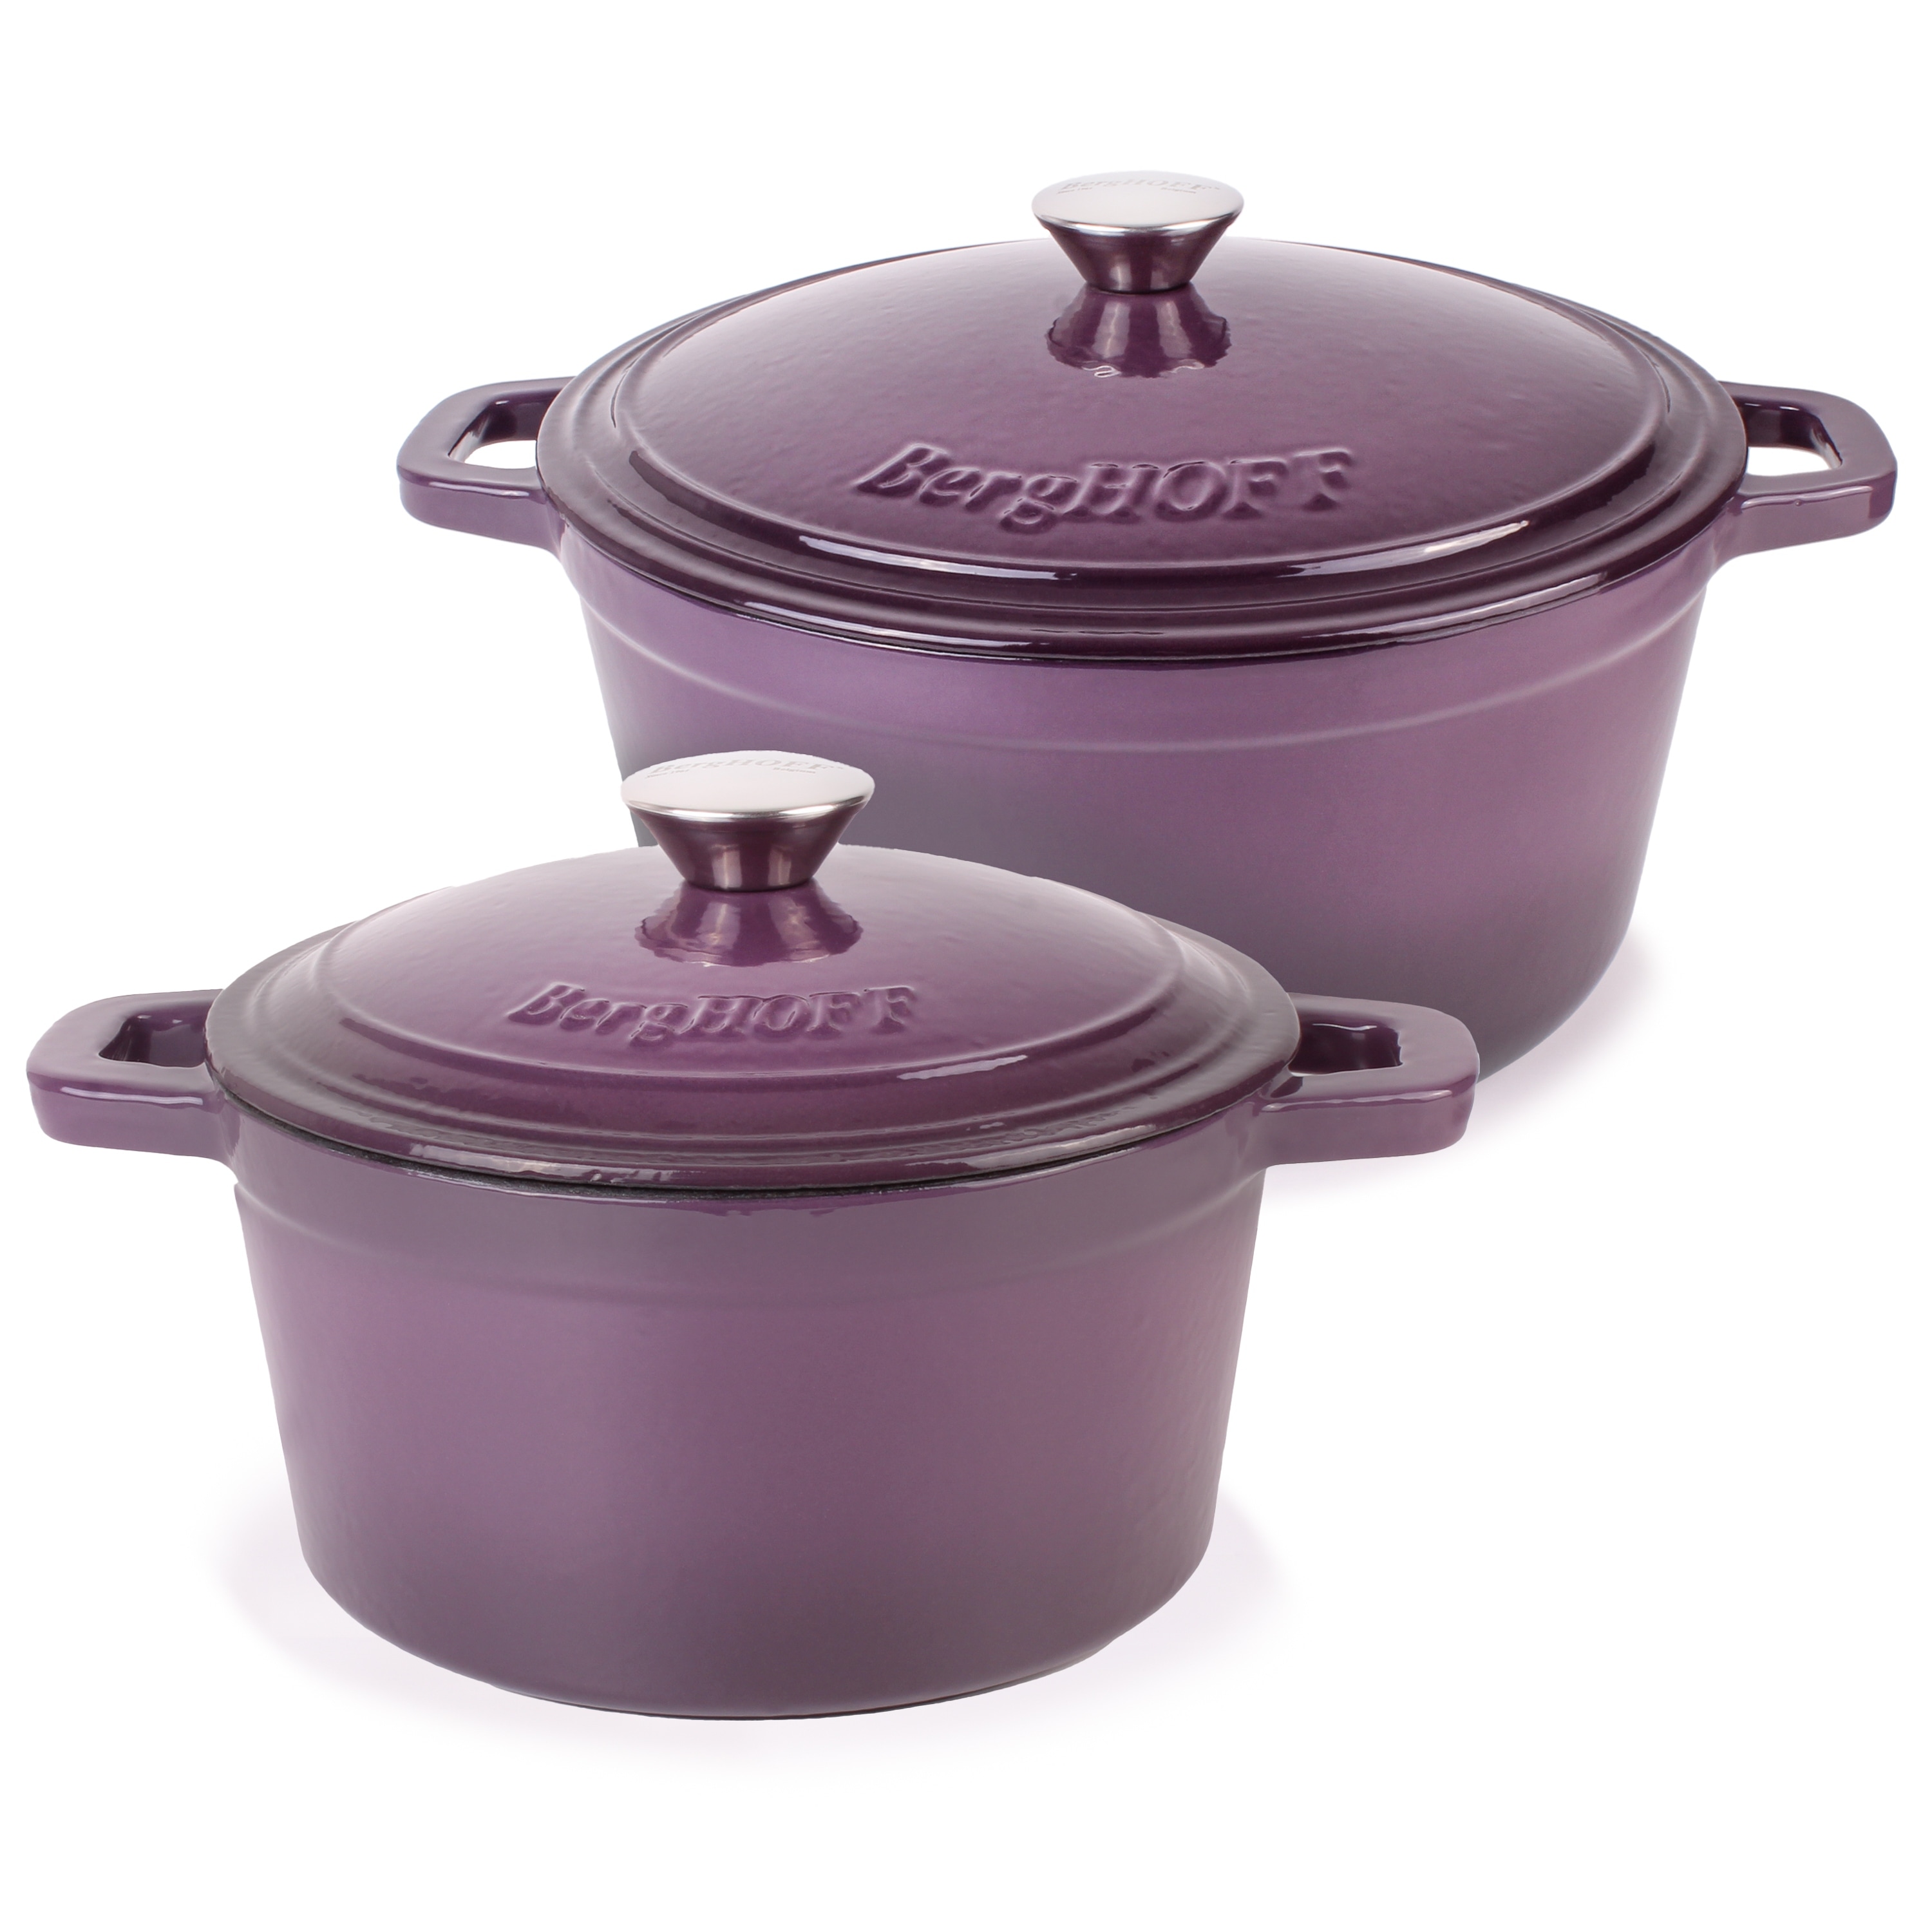 https://ak1.ostkcdn.com/images/products/is/images/direct/d7d9383f3eee20411780a62abb5d97986f06741c/Neo-4pc-Cast-Iron-Set-3qt-Covered-Dutch-Oven-%26-7qt-Covered-Stockpot-Purple.jpg